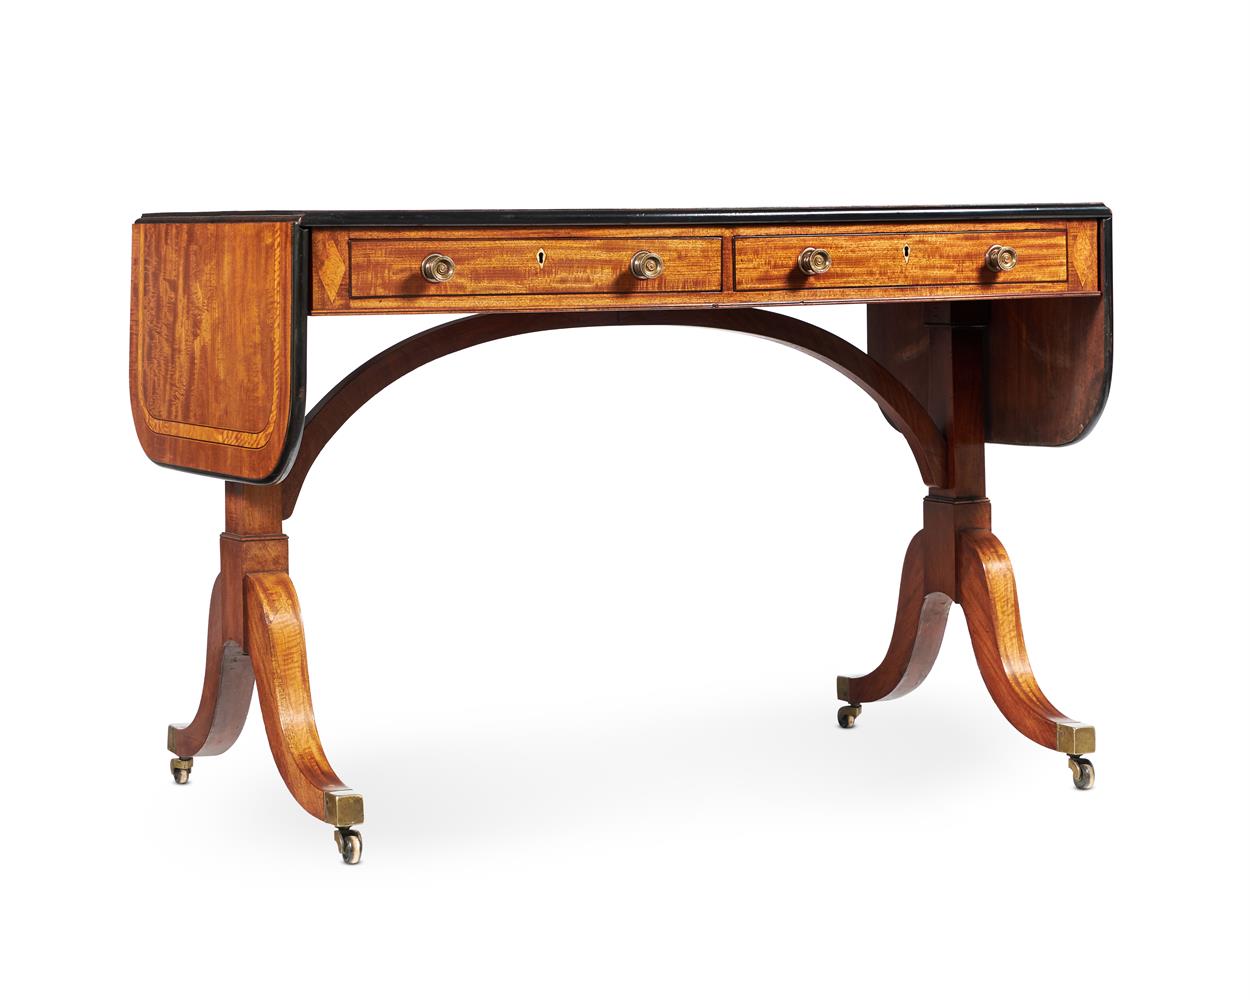 Y A GEORGE III SATINWOOD SOFA TABLE, ATTRIBUTED TO GILLOWS, CIRCA 1790 - Image 2 of 6